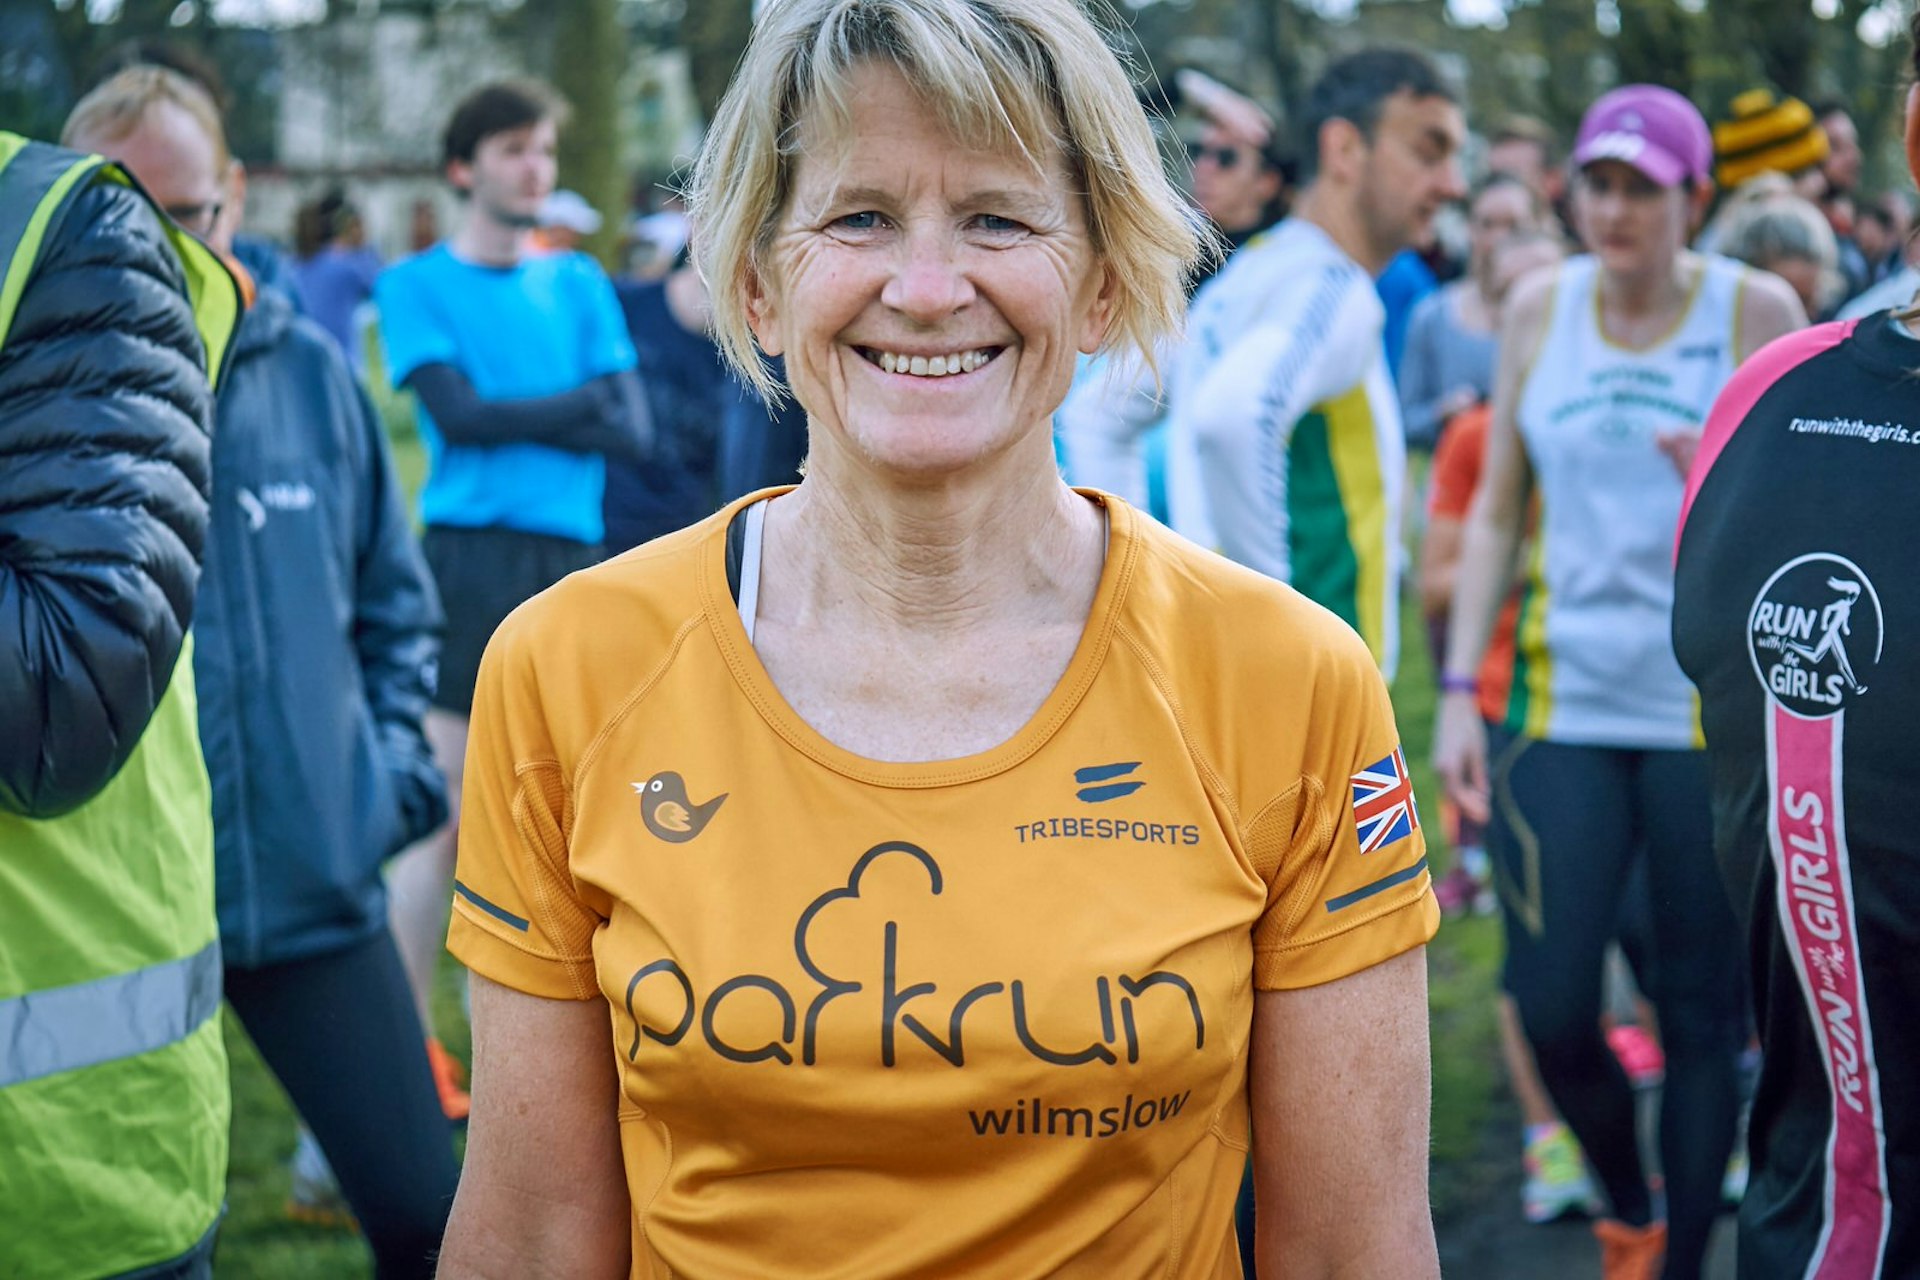 A woman in an orange parkrun shirt looks into the camera with a broad smile on her face; behind her are other runners milling 